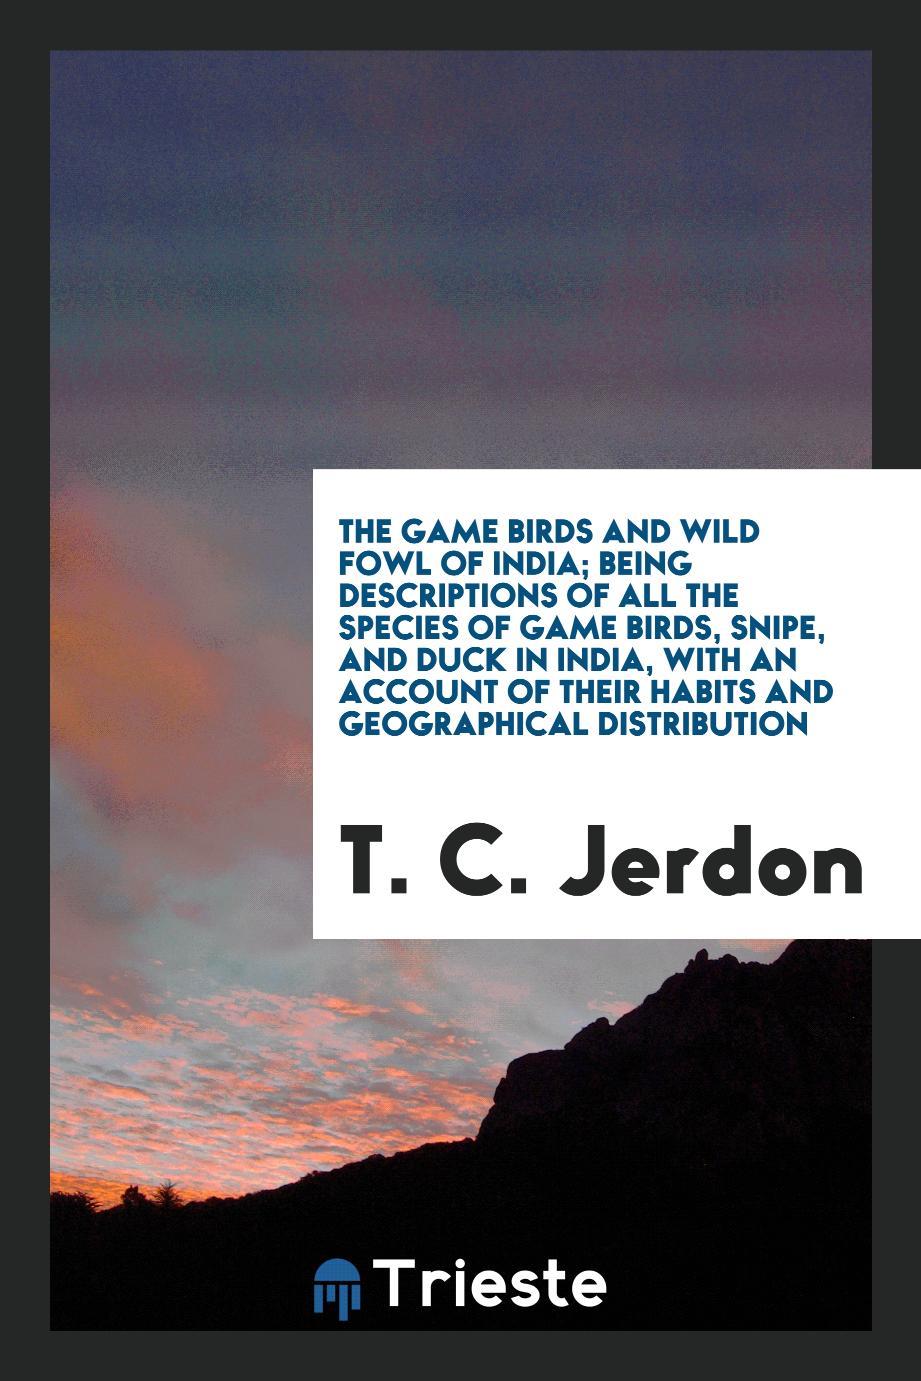 The Game Birds and Wild Fowl of India; Being Descriptions of All the Species of Game Birds, Snipe, and Duck in India, with an Account of Their Habits and Geographical Distribution